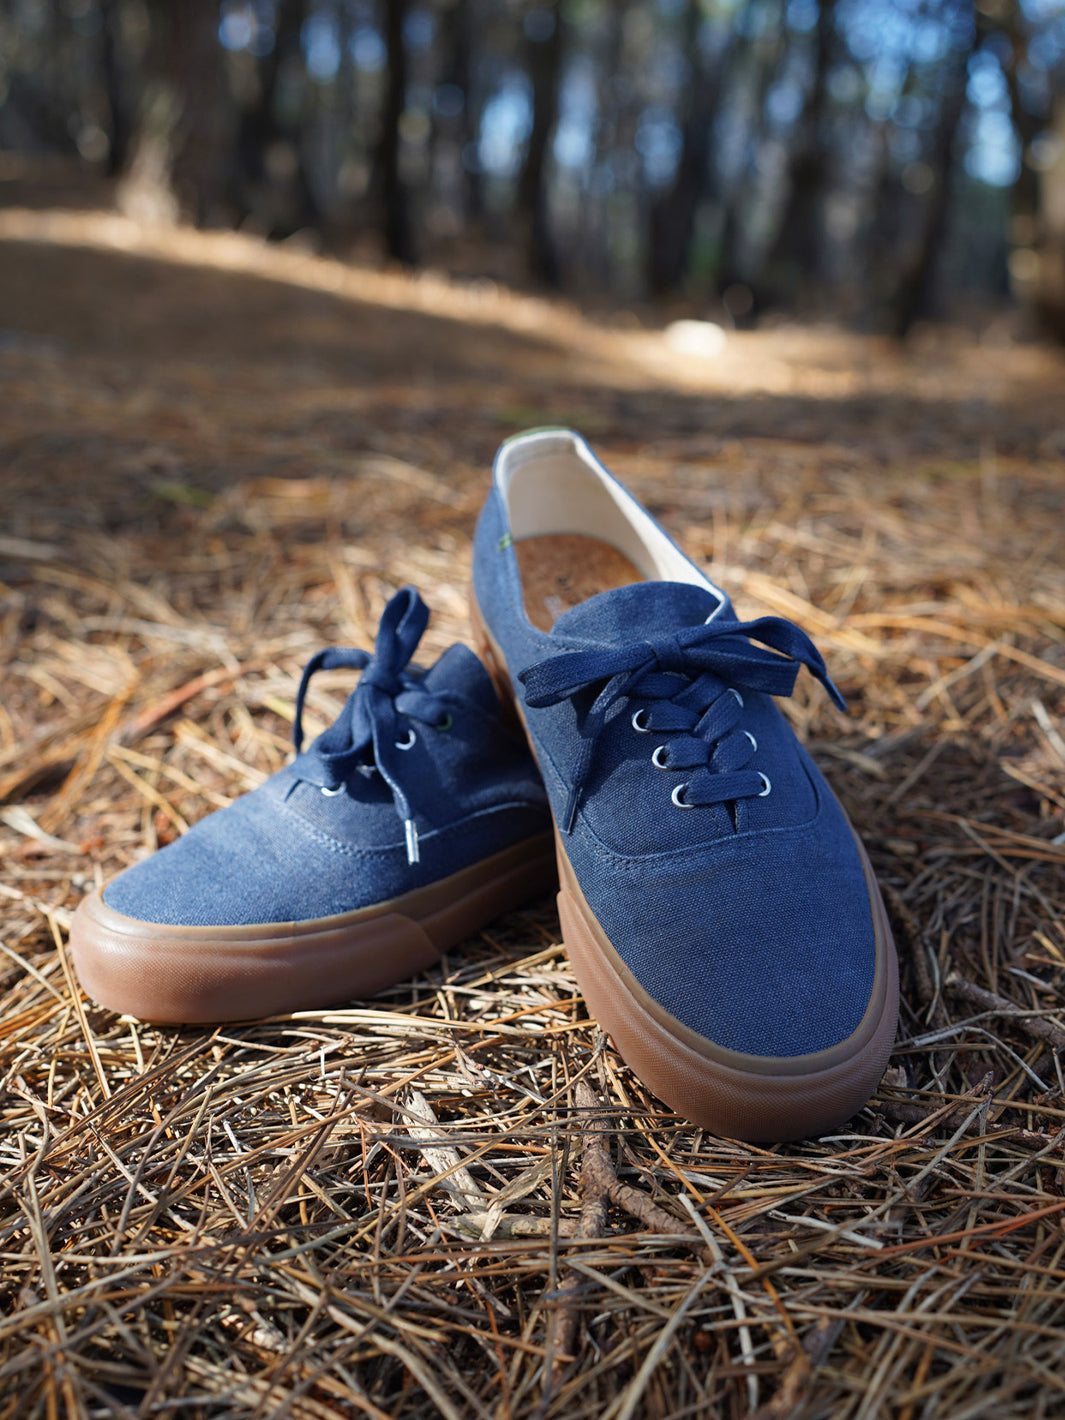 Collective Canvas x Asuwere Oxford Sneaker - Navy